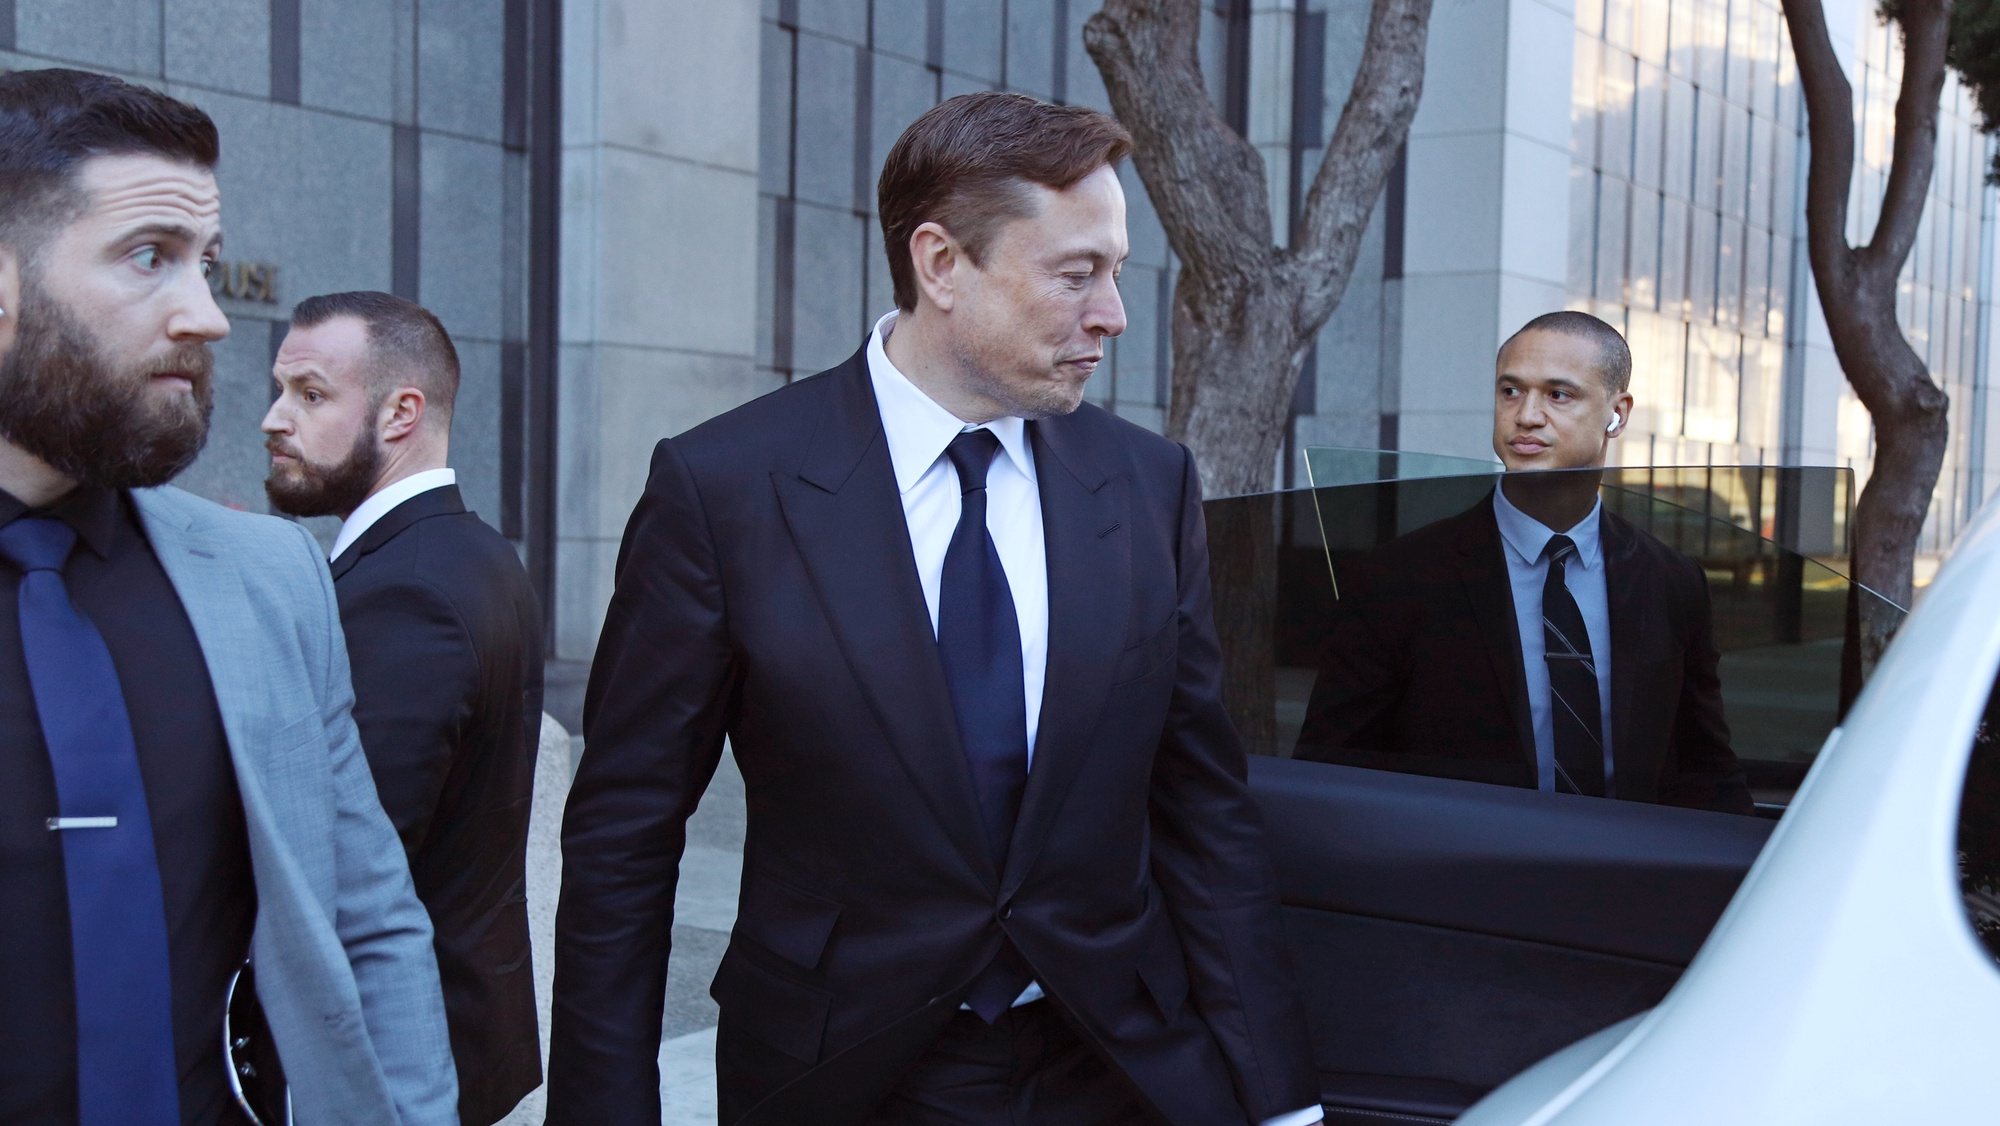 epa10427389 Tesla CEO Elon Musk leaves the Phillip Burton Federal Building and U.S. Courthouse for the fourth day of the trial of Tesla shareholders lawsuit against Musk in San Francisco, California, USA, 24 January 2023. Tesla shareholders against CEO Elon Musk are taking him to court after he tweeted in 2018 that he could take Tesla private at 240 US dollars a share, a statement that caused volatility in the electric car company&#039;s stock price.  EPA/GEORGE NIKITIN